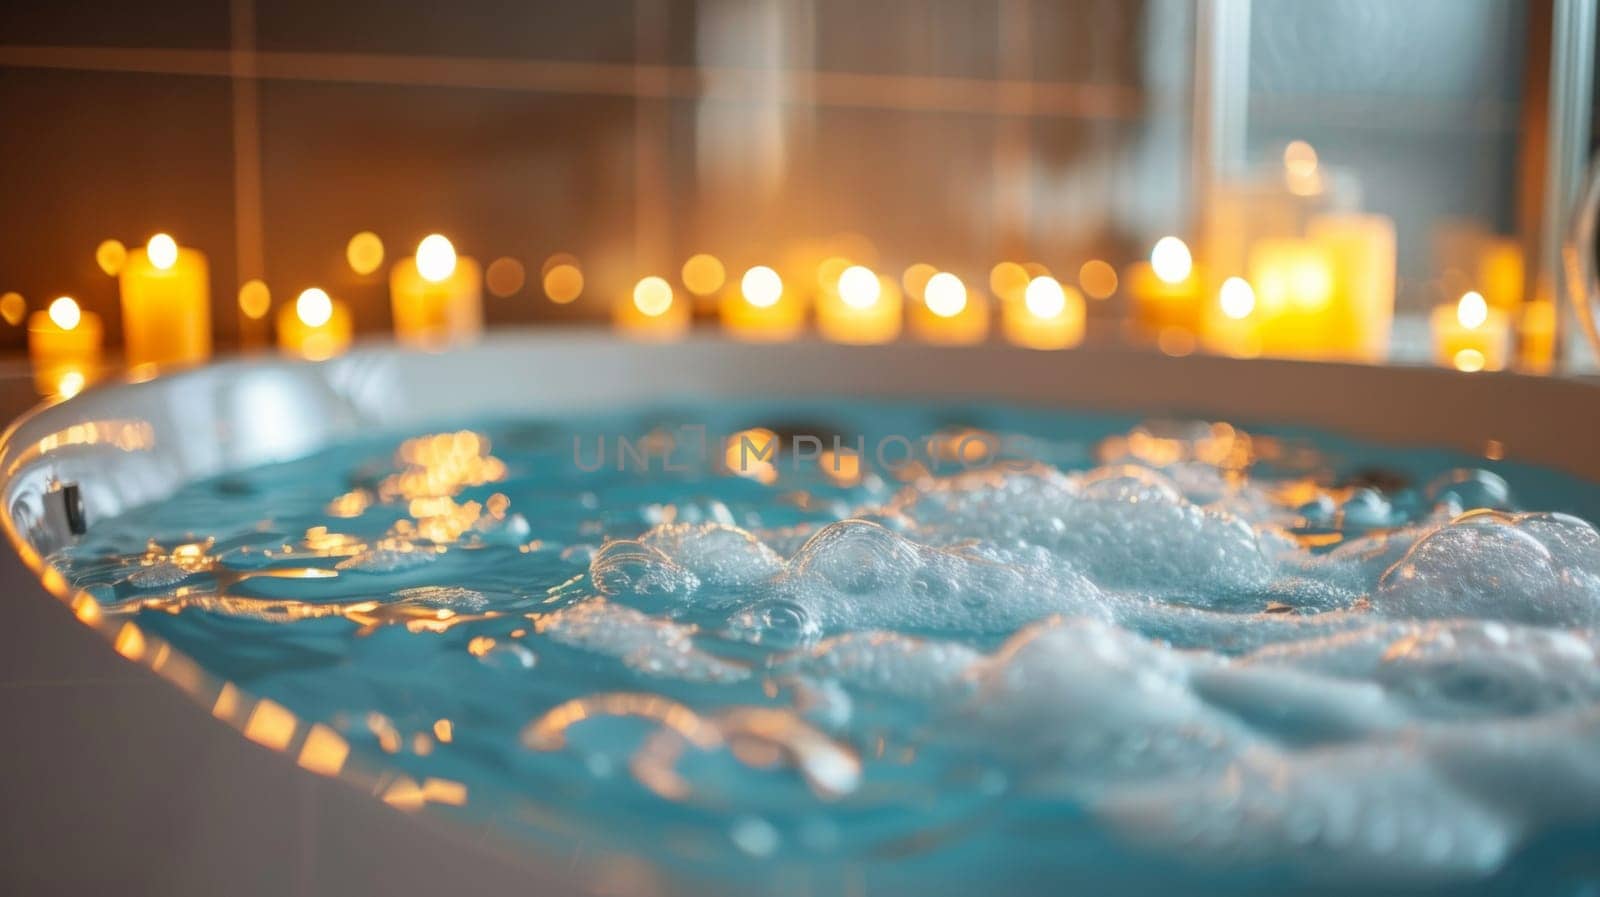 A close up of a bathtub filled with bubbles and lit candles, AI by starush